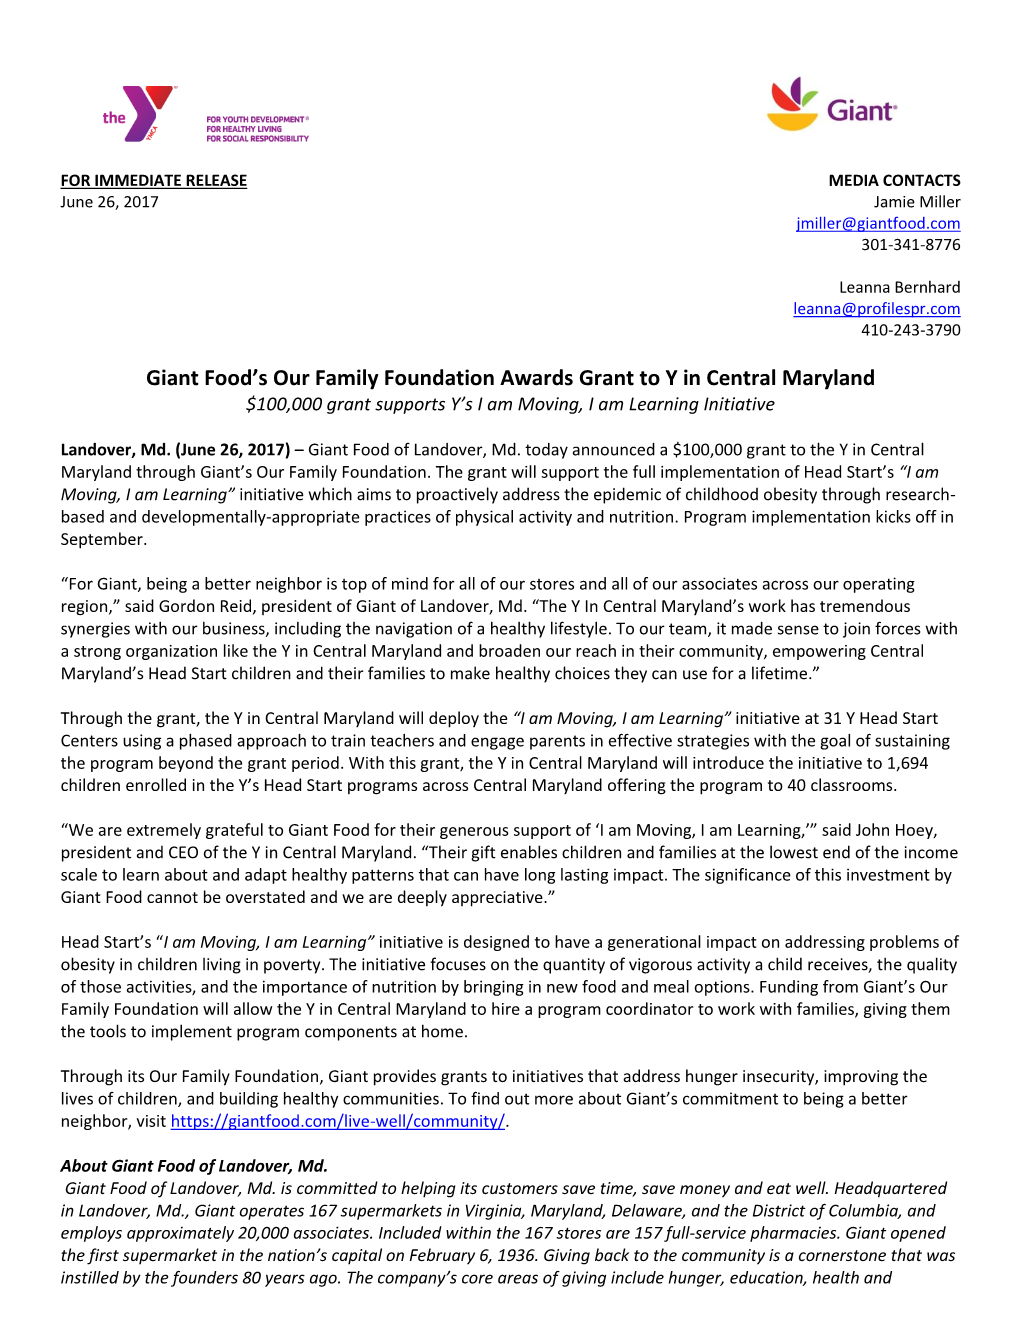 Giant Food's Our Family Foundation Awards Grant to Y in Central